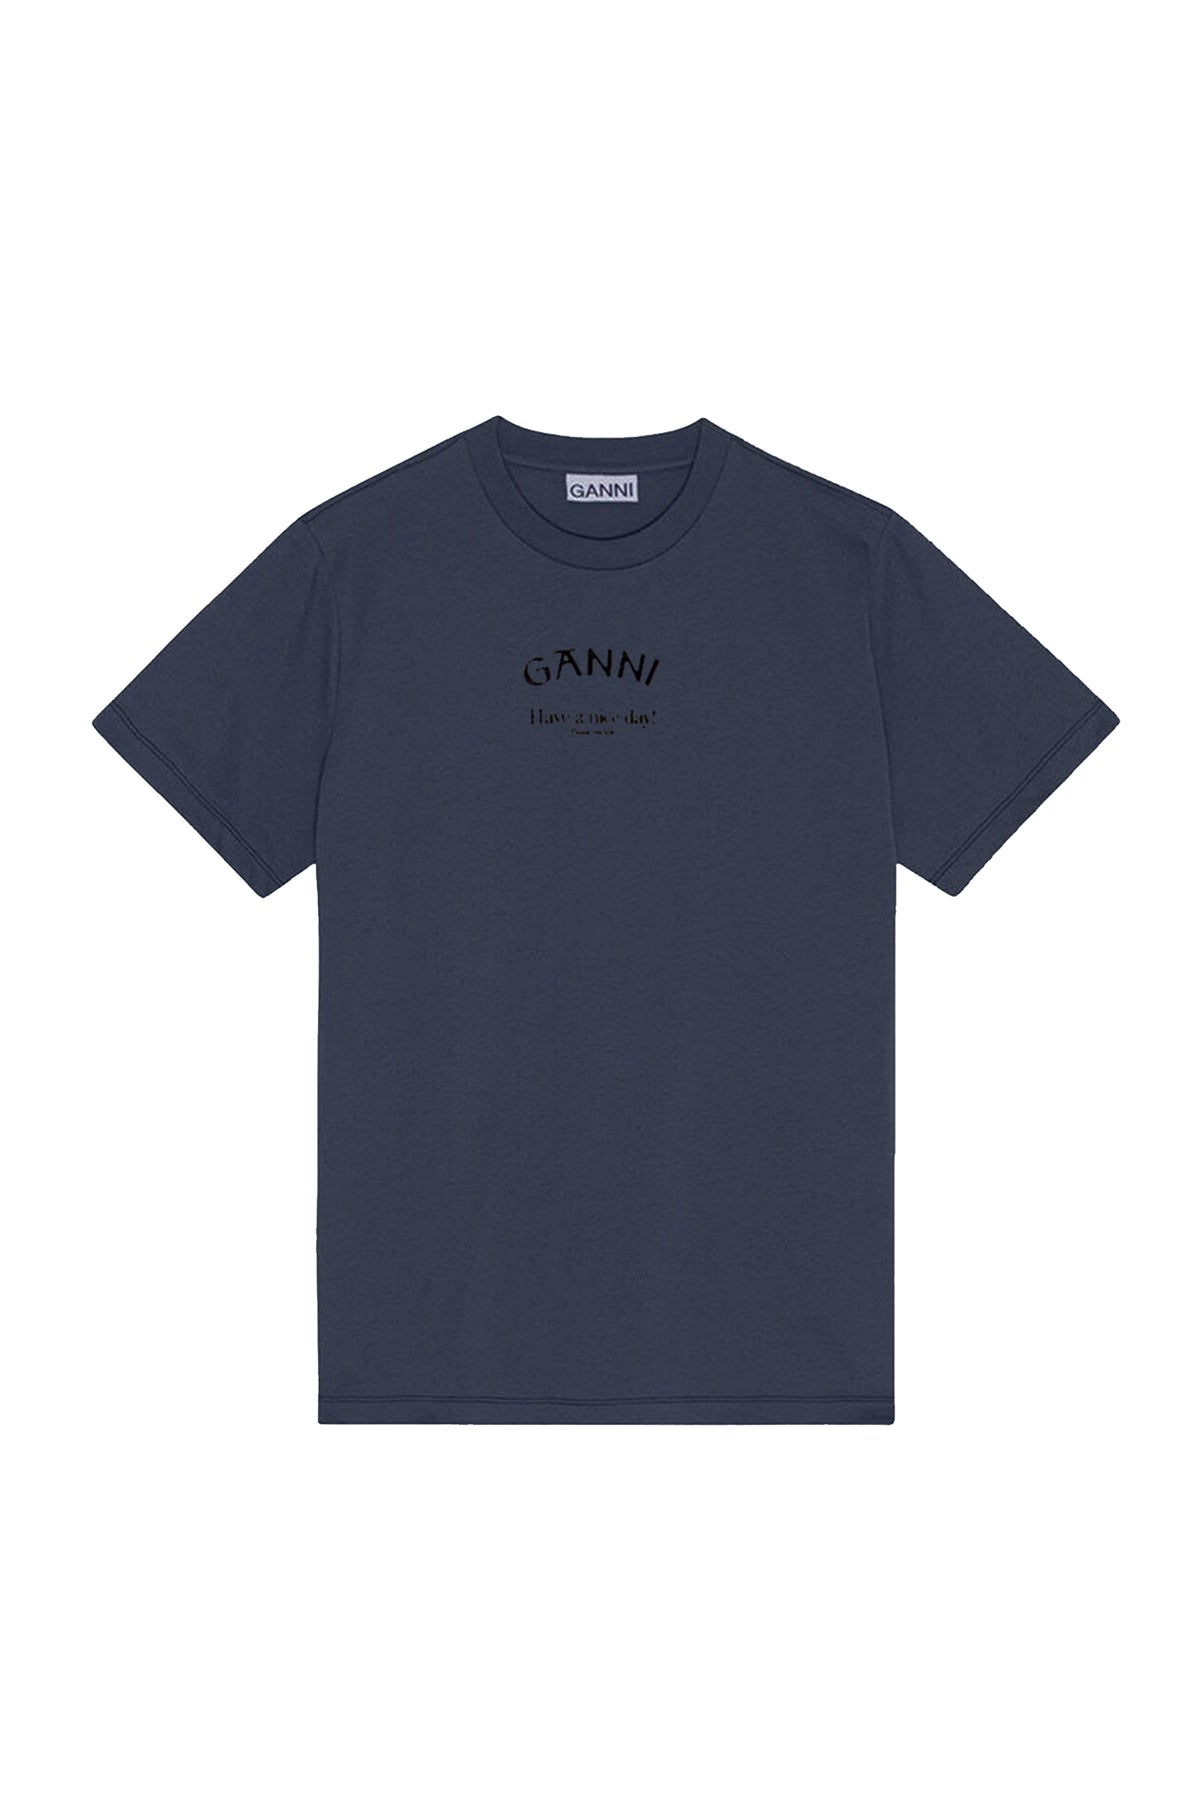 RELAXED O-NECK T-SHIRT / NVY